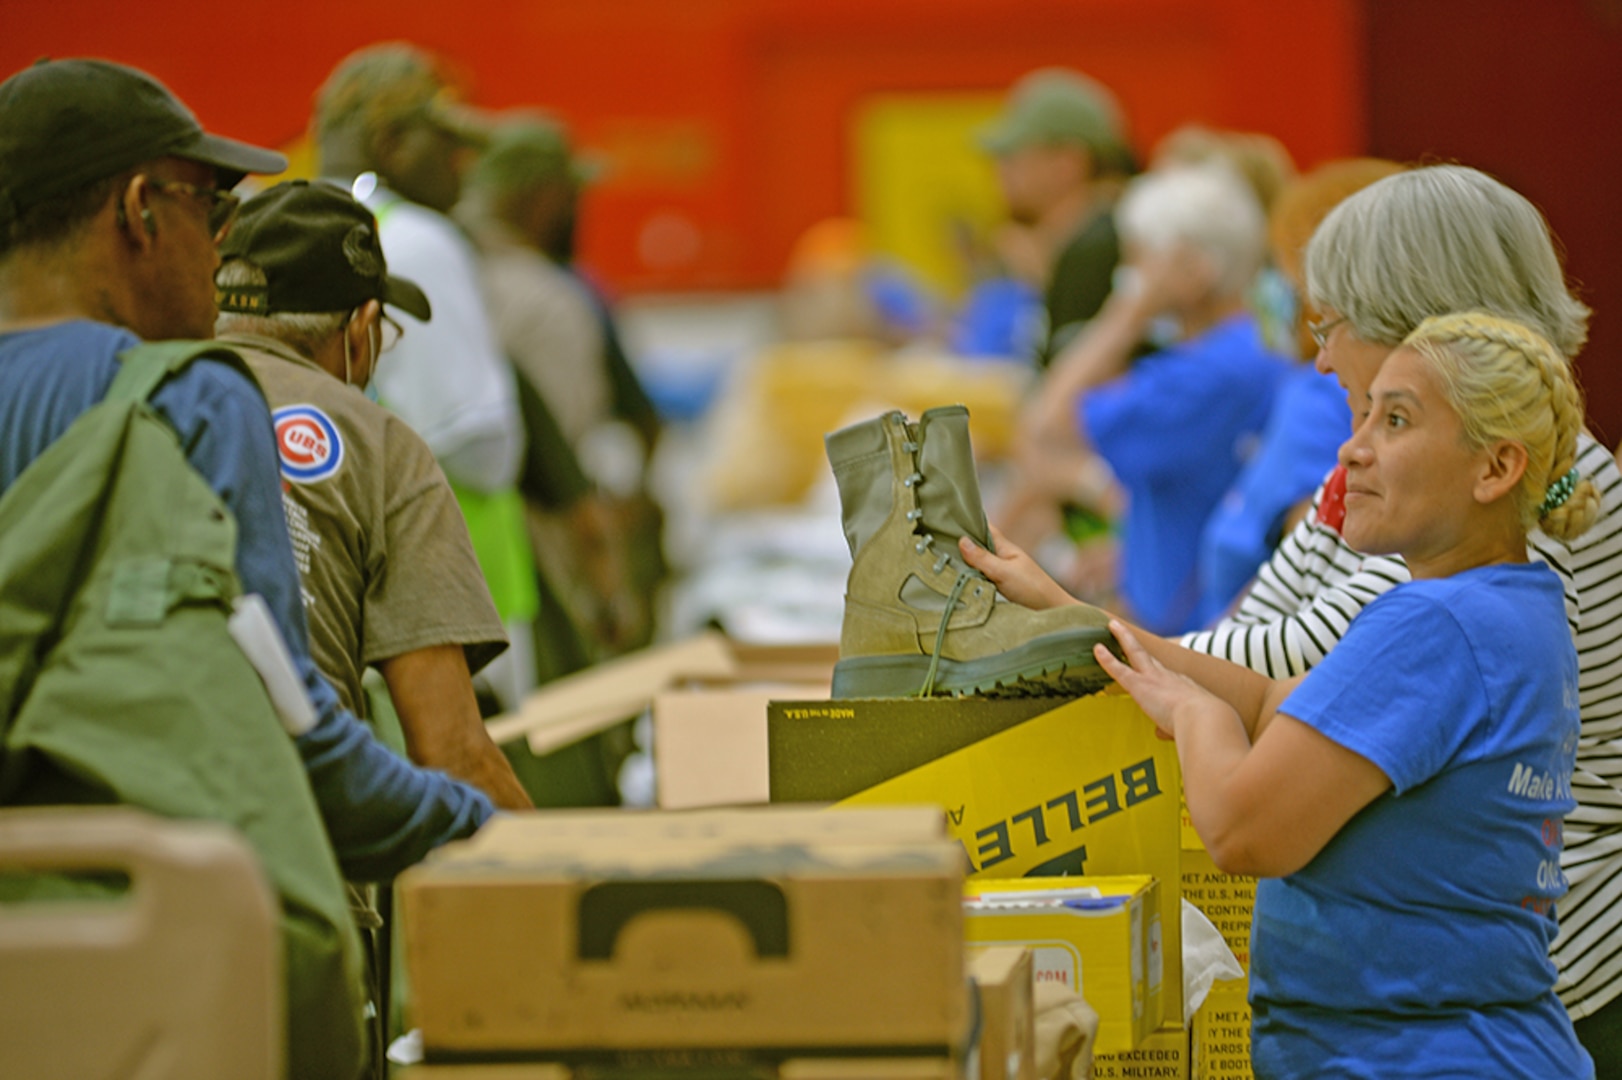 A volunteer hands out free boots in a surplus property line.